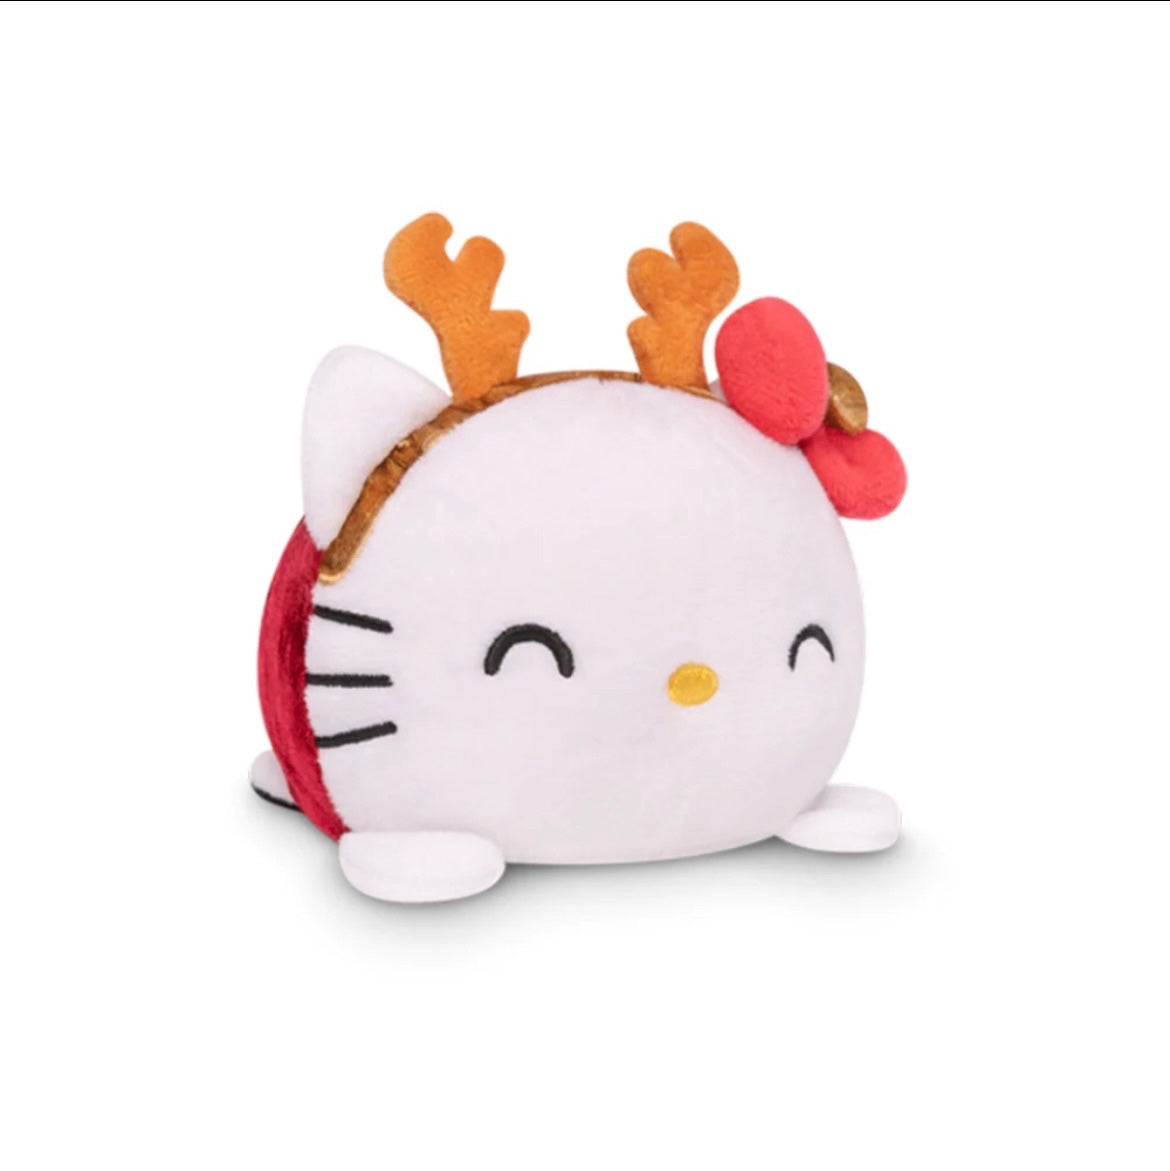 Hello Kitty Holiday 2-in-1 Reversible Plush